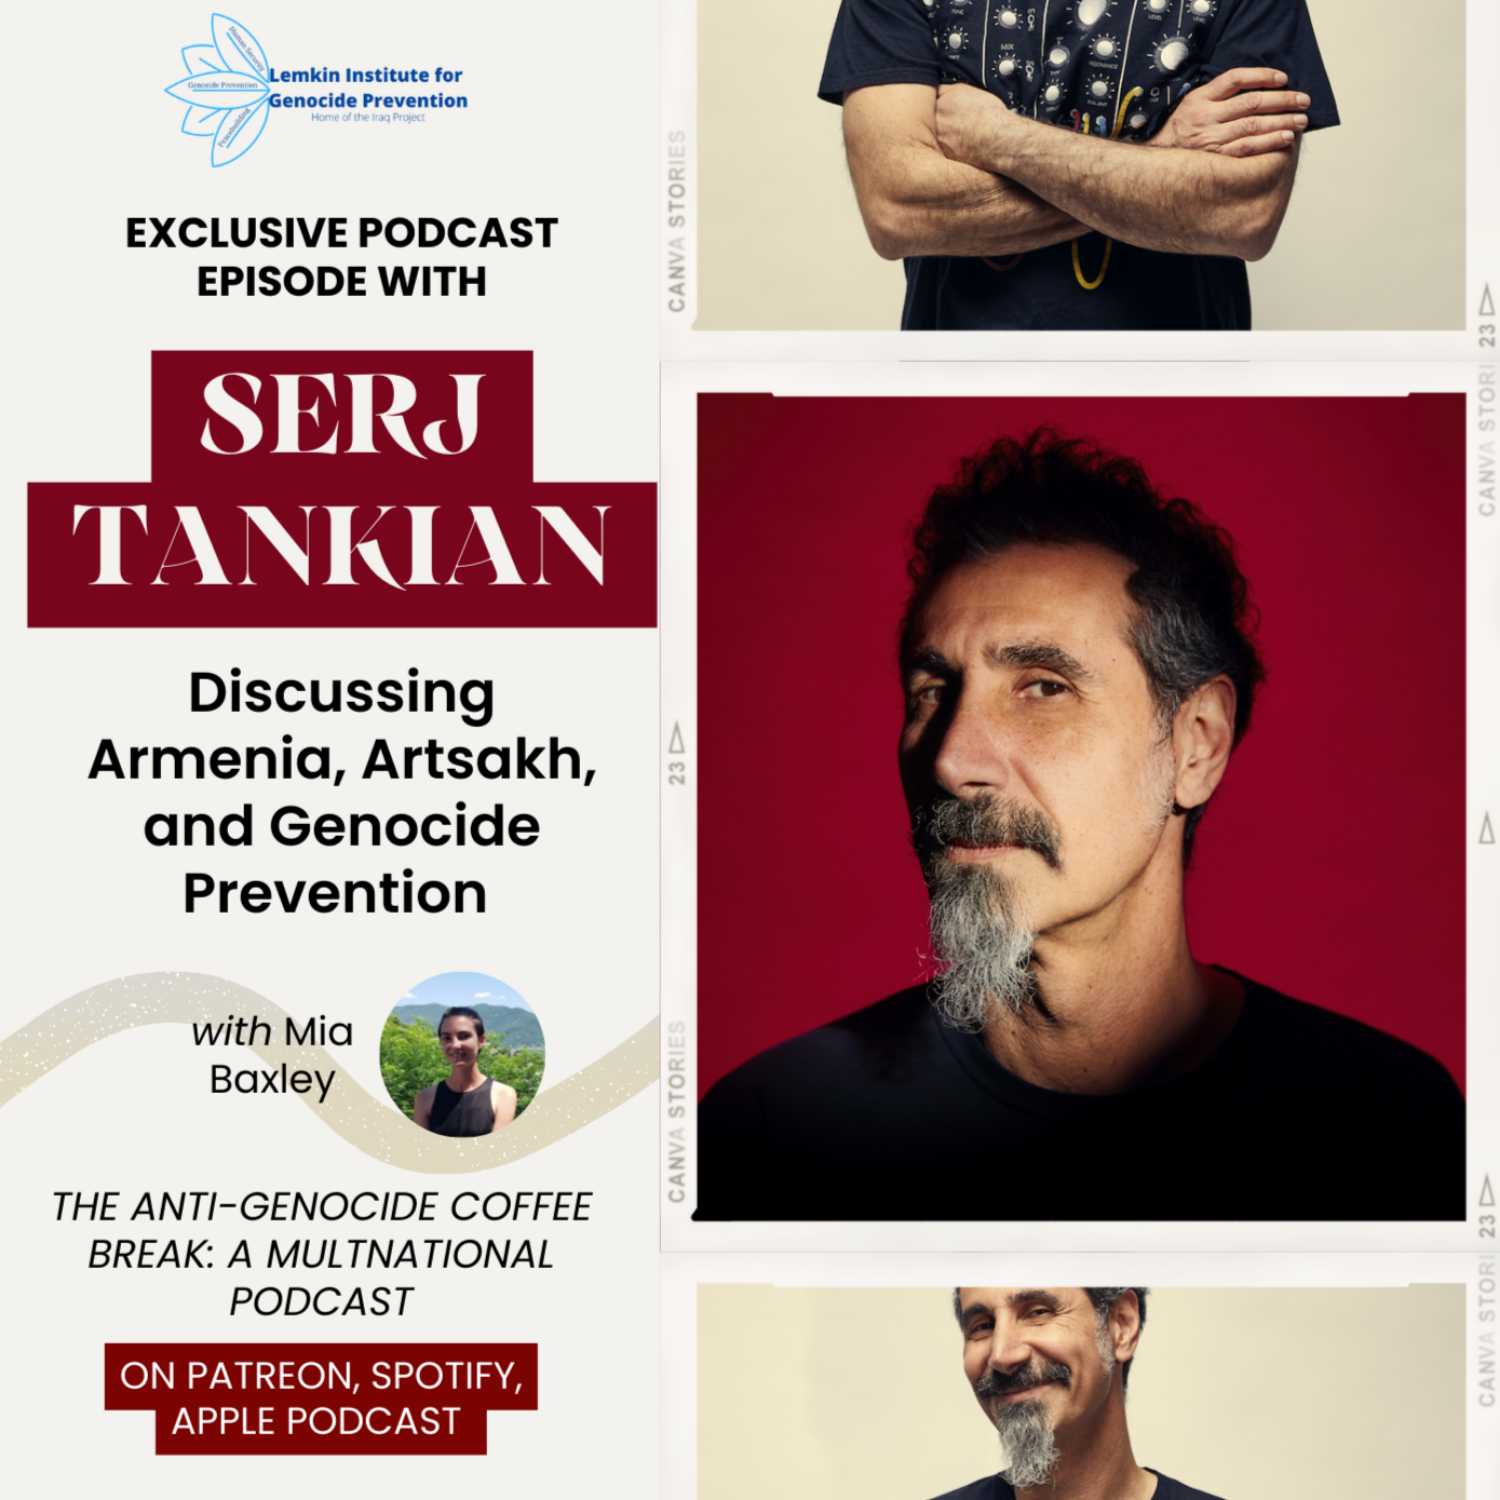 Episode 20: Identity, Advocacy, and Art in Genocide Prevention with Serj Tankian